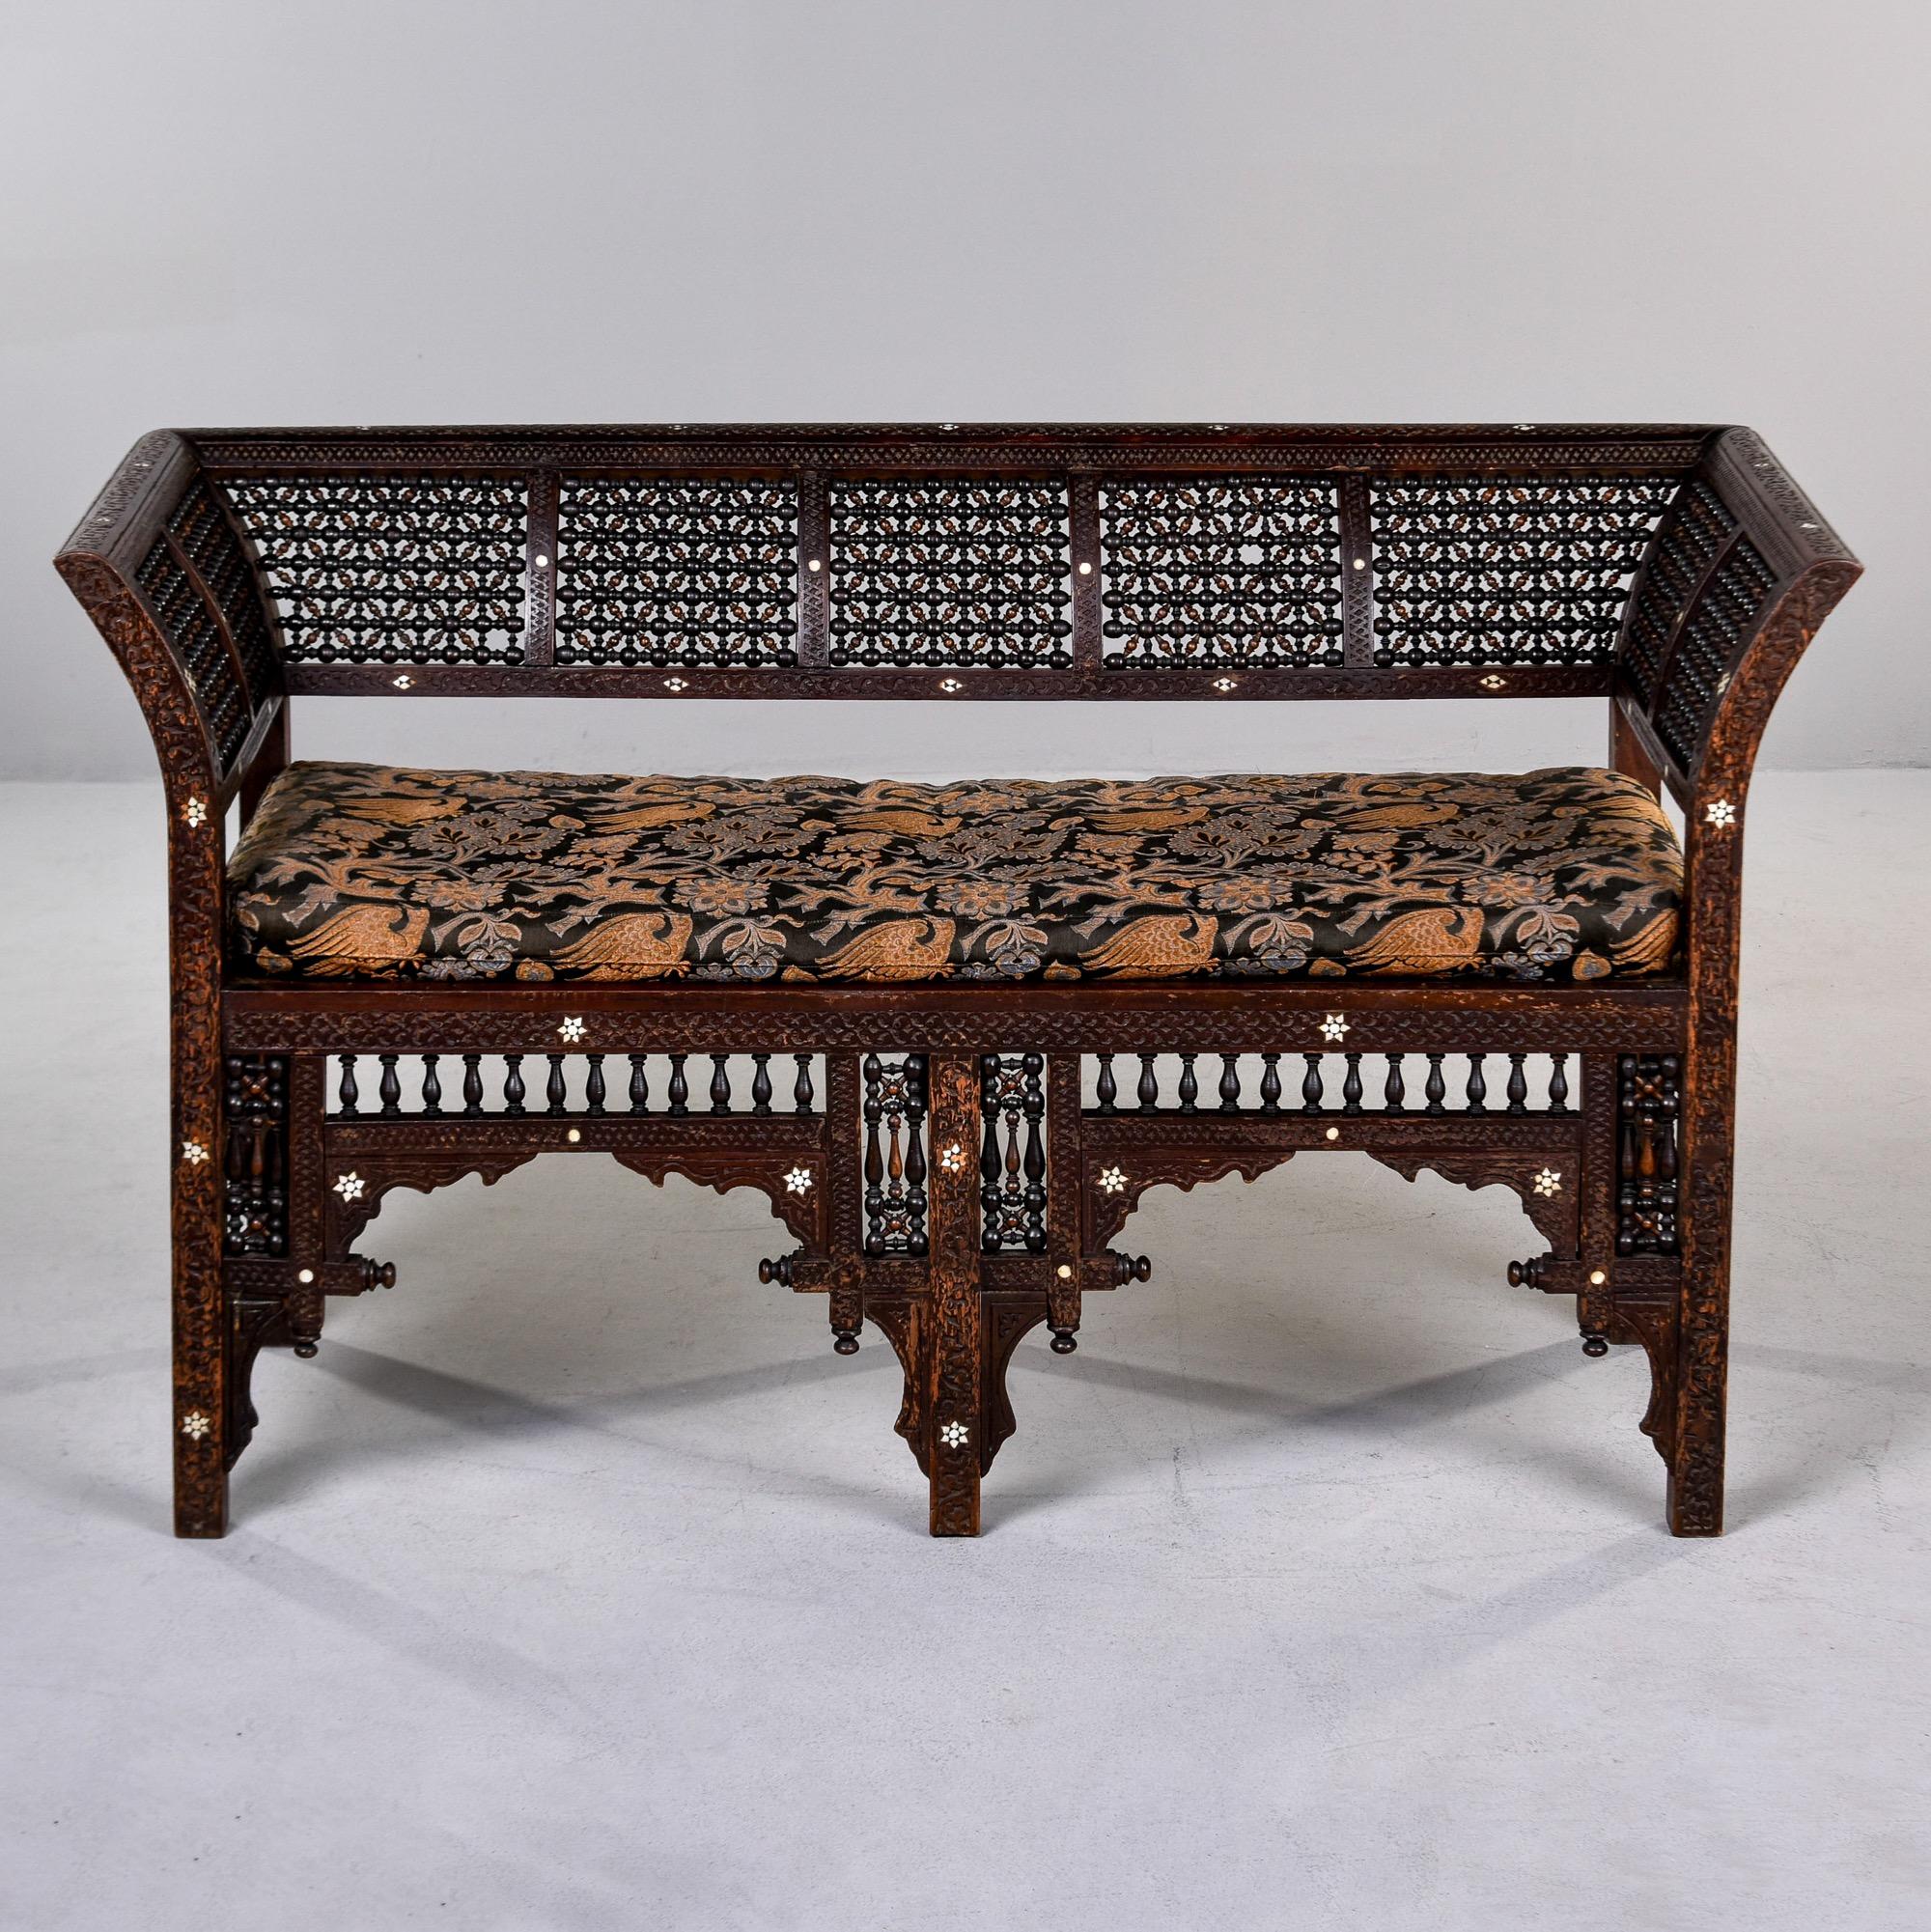 Found in Turkey, this hand-carved wood settee dates from approximately 1910. This backrest and sides of this settee feature an intricately carved lattice pattern with no breaks or repairs found. The settee frame is adorned with white shell inlay and